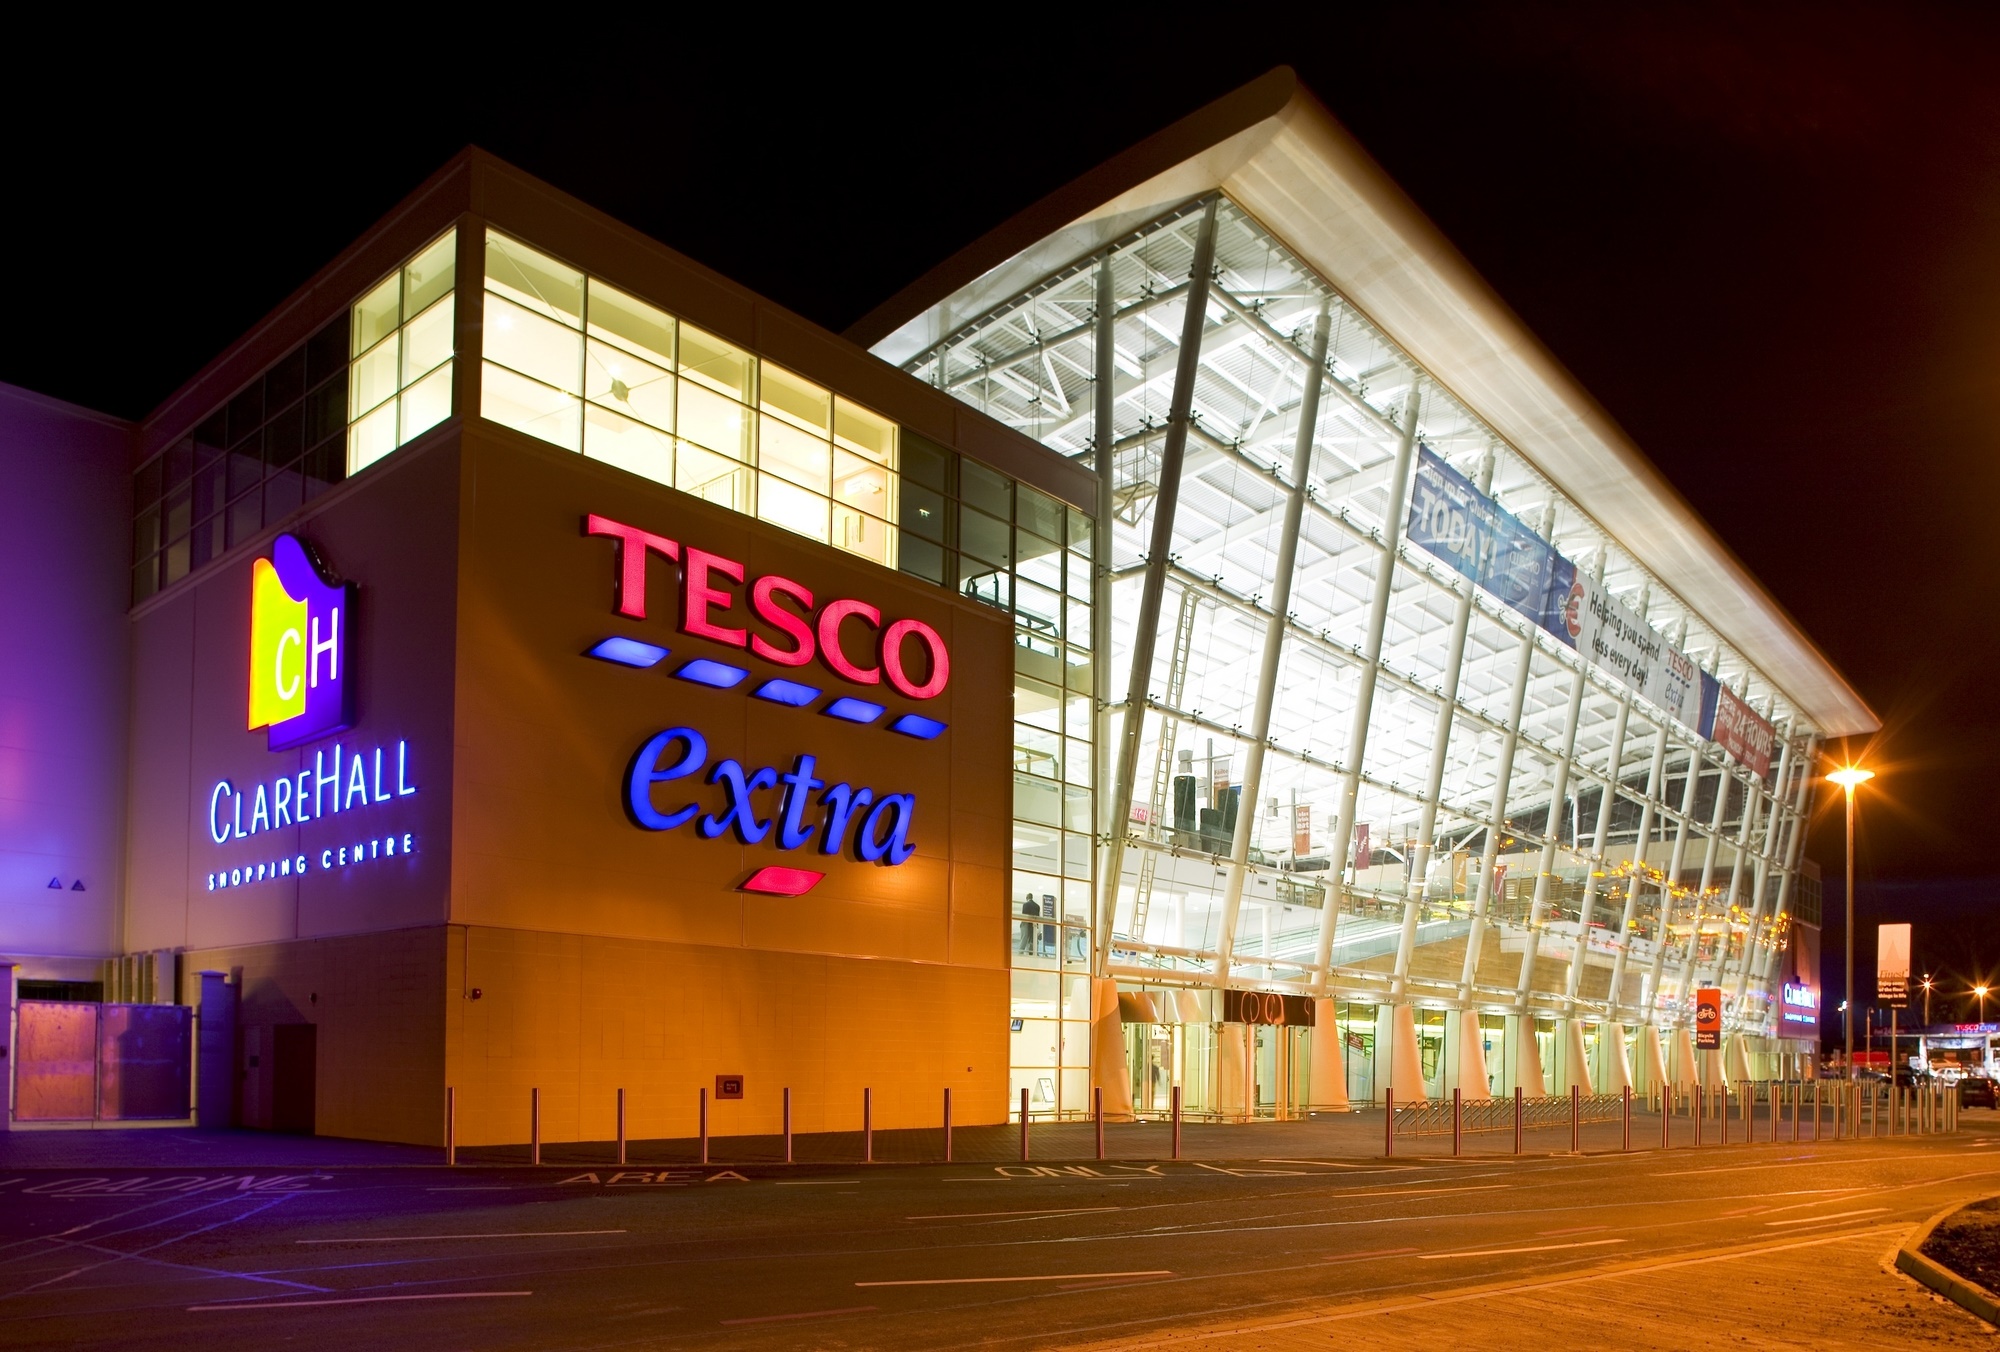 Tesco Resumes Market Share Growth, Kantar and Nielsen Find